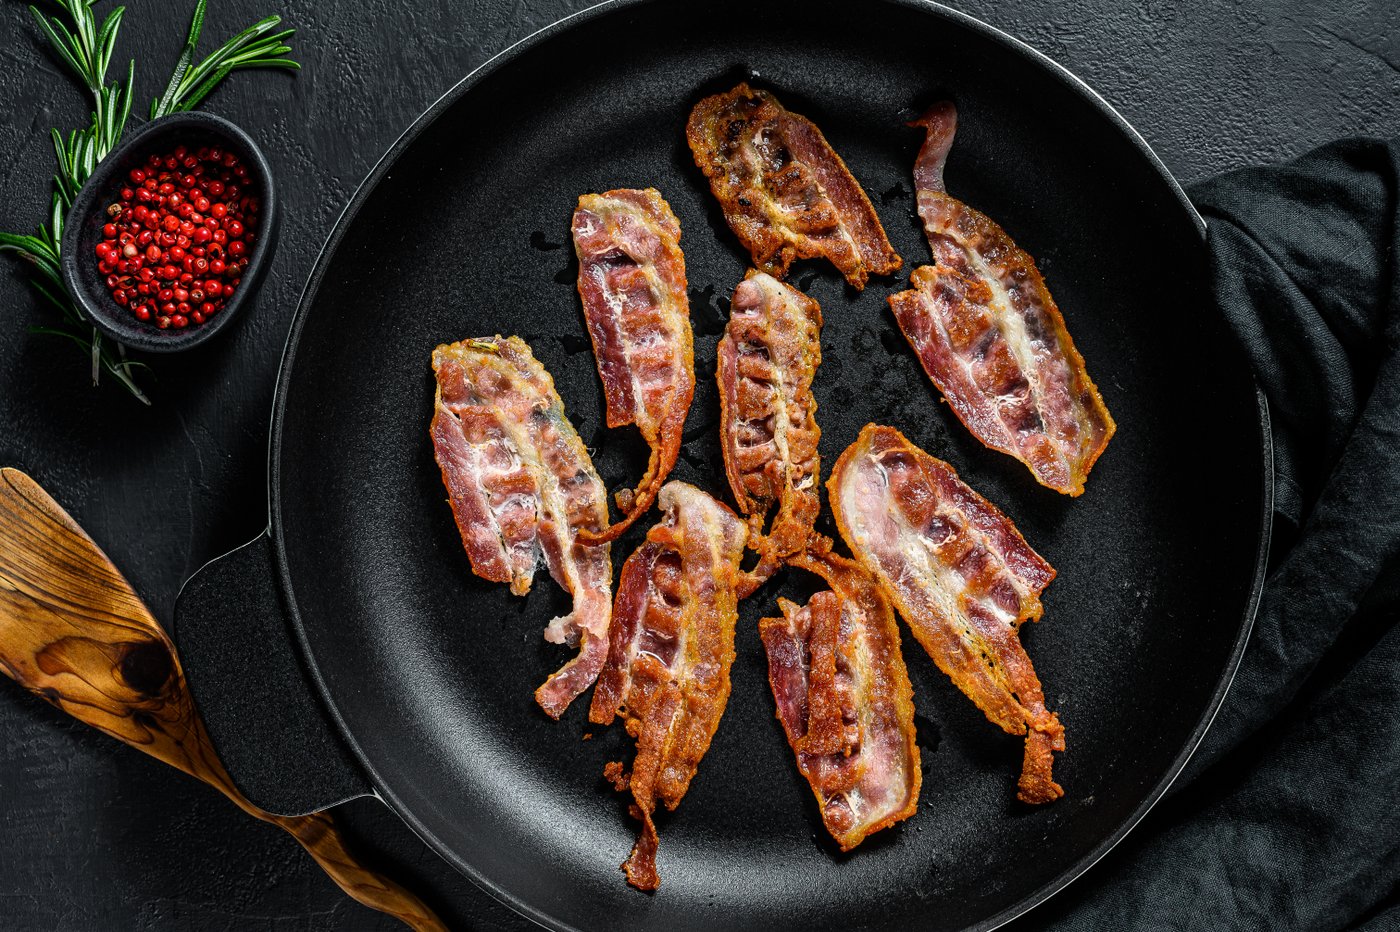 Slices of crispy hot fried cooked bacon